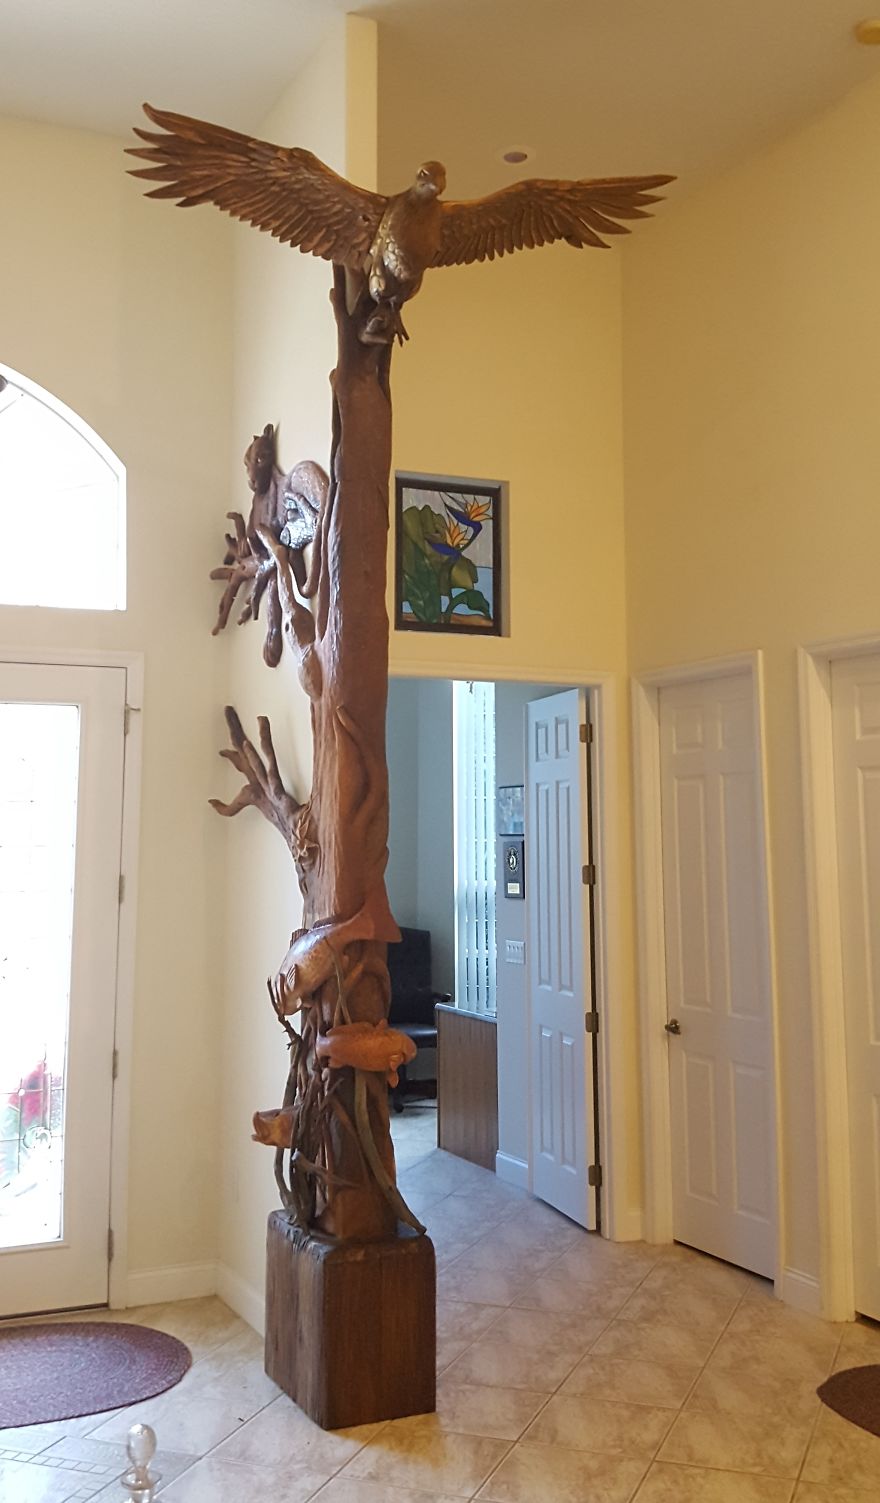 I Hand-Carved This "Nature Tree"